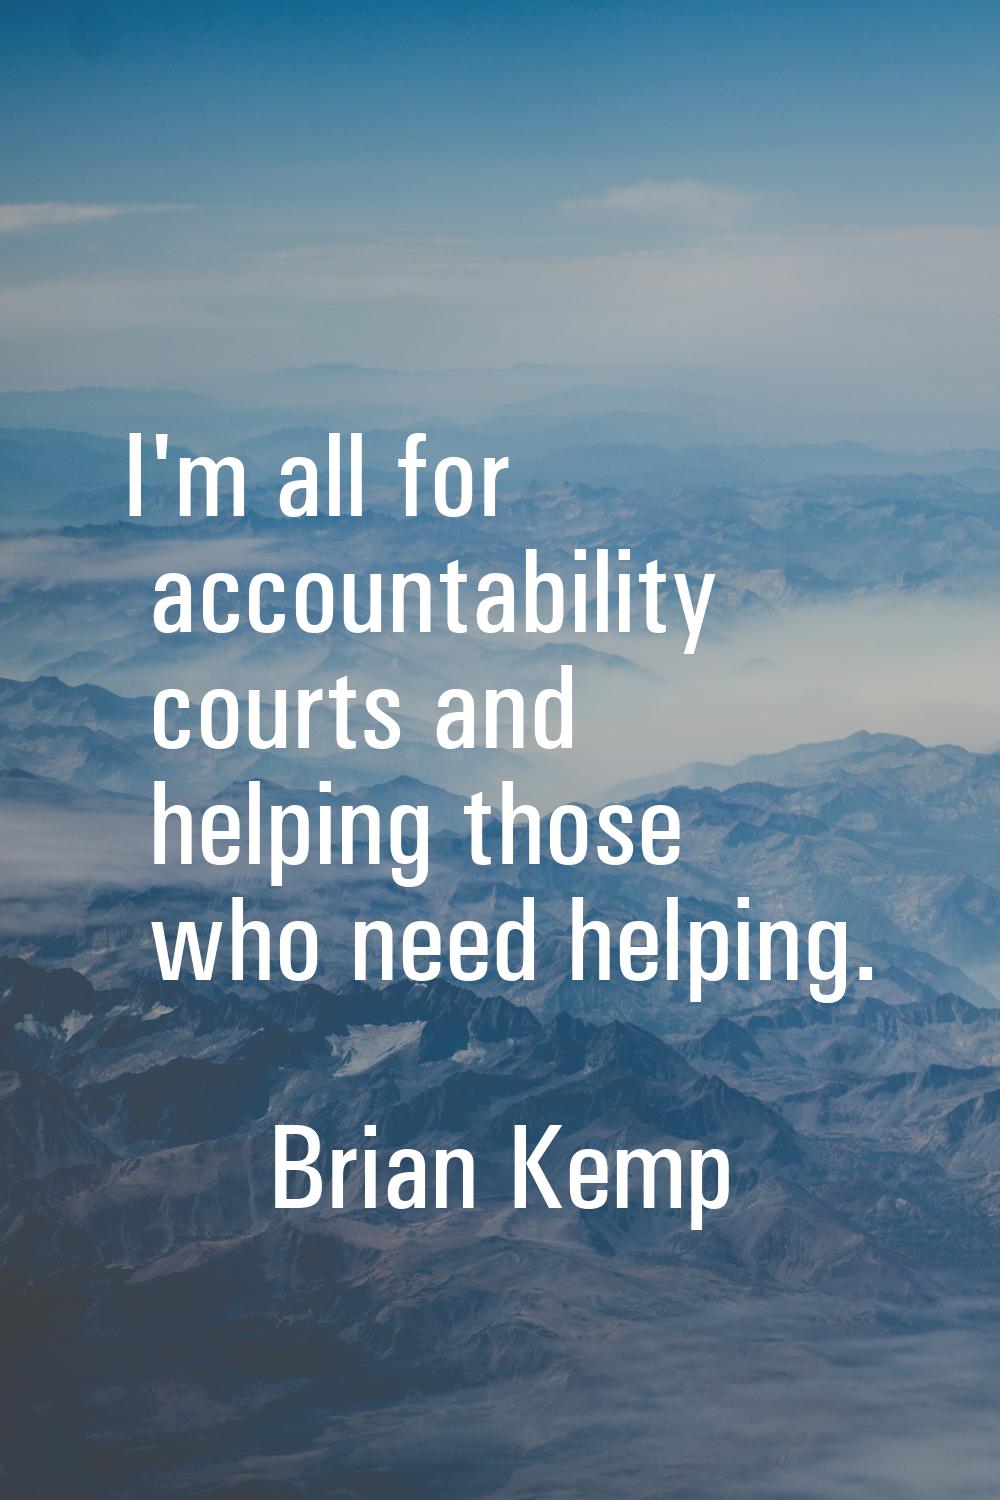 I'm all for accountability courts and helping those who need helping.